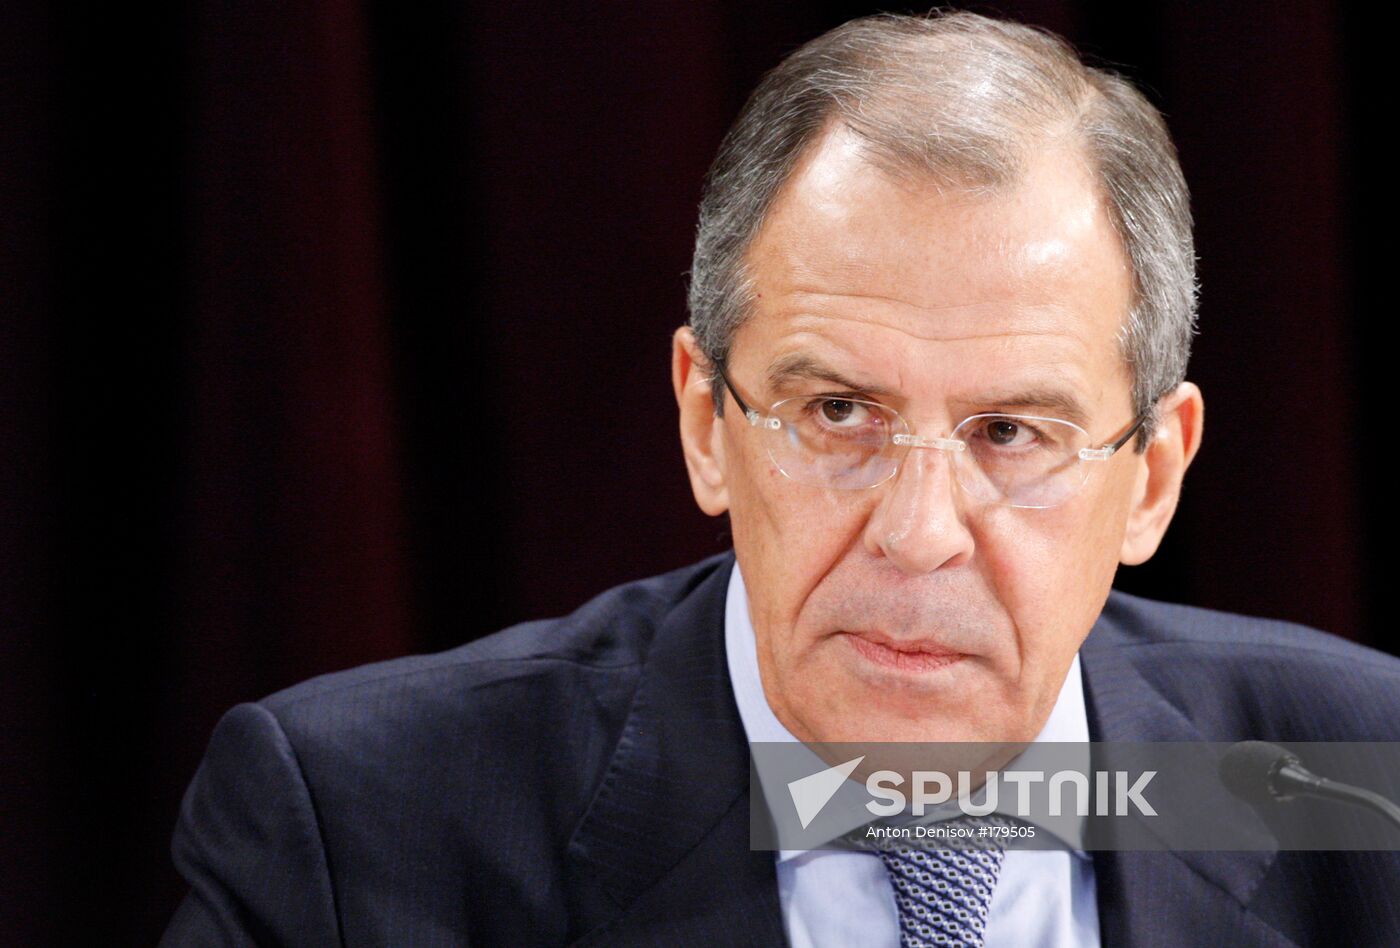 Sergei Lavrov holds a news conference